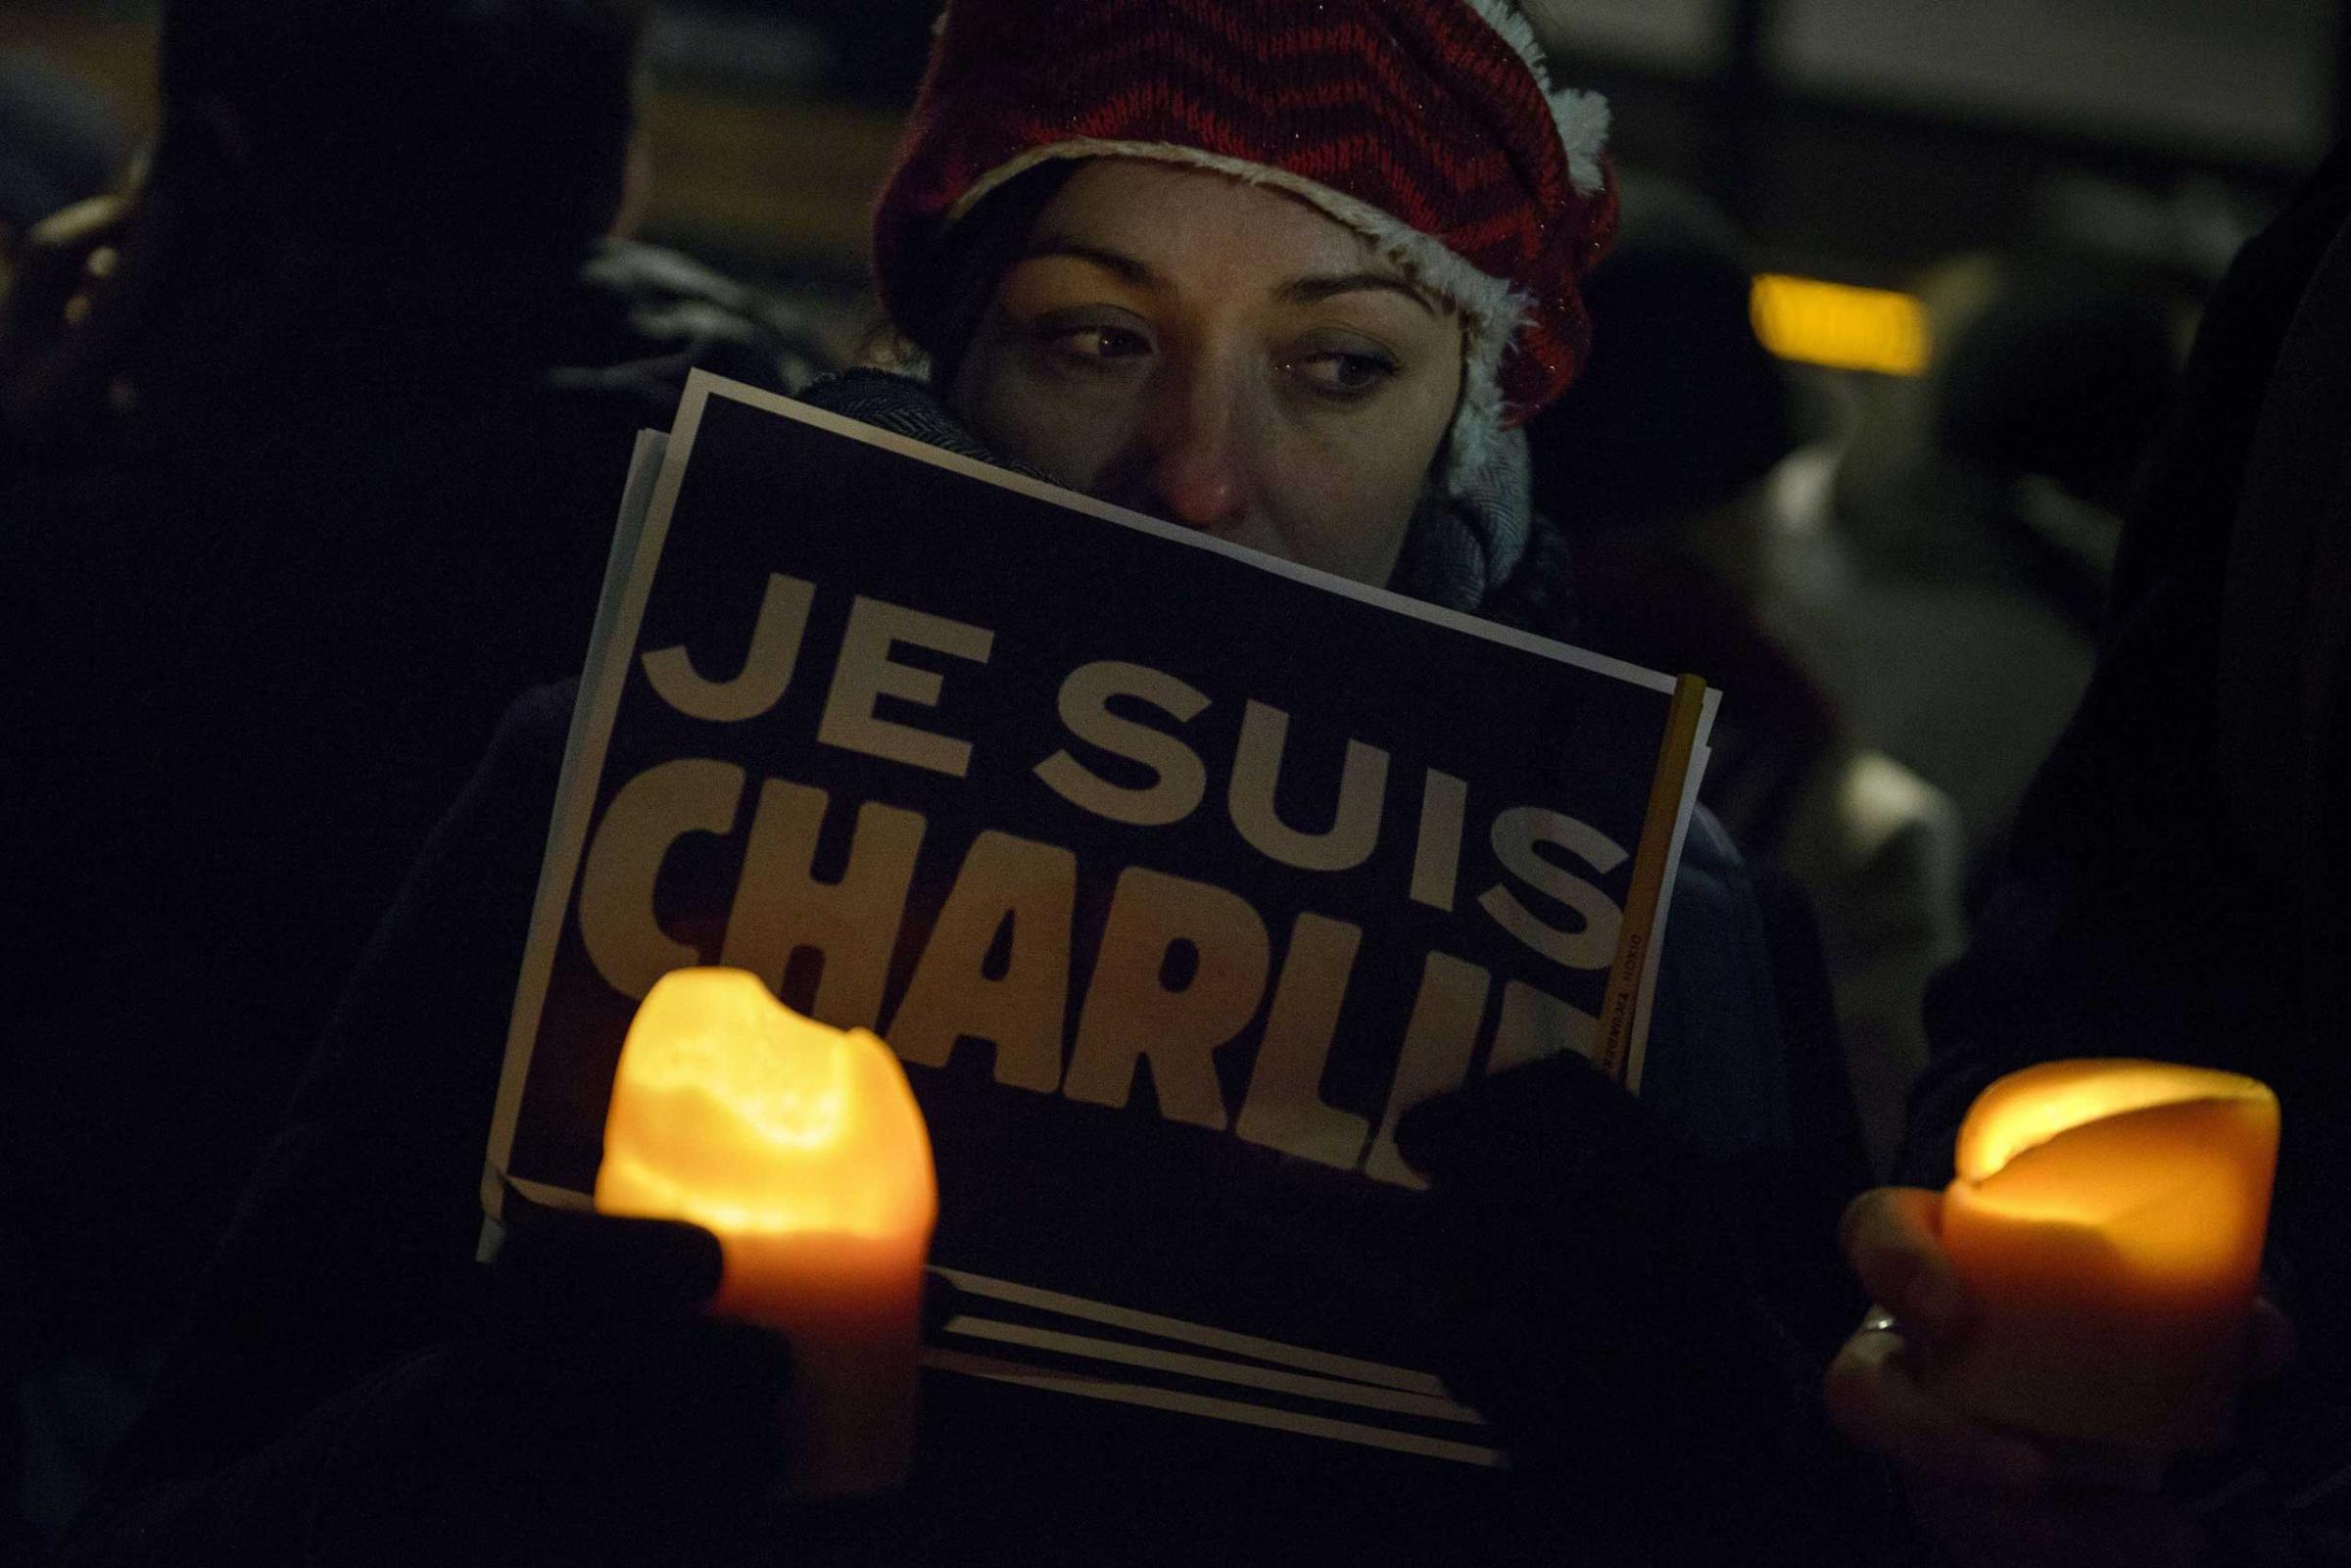 Jan. 7, 2015. People hold posters with the words "Je Suis Charlie" (I Am Charlie) outside the Newseum in Washington, D.C.